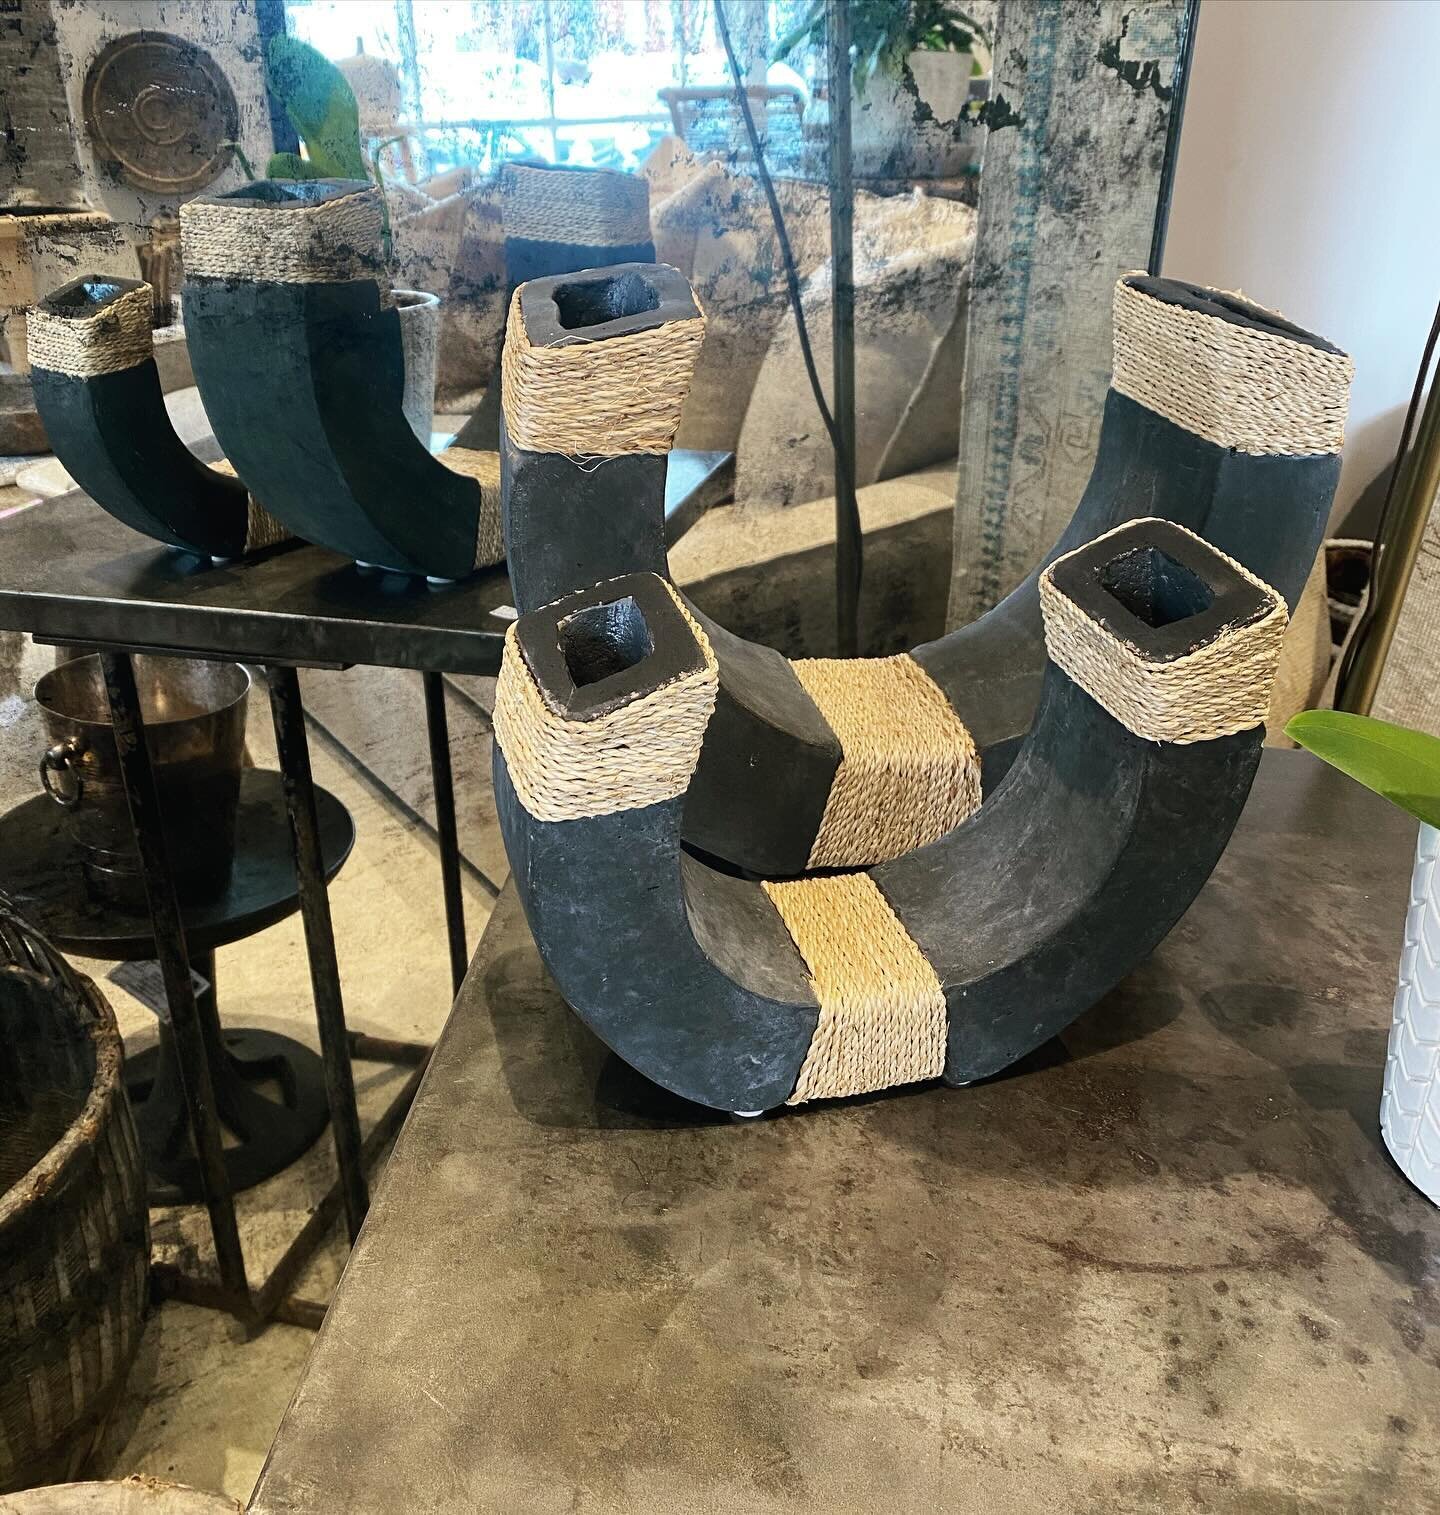 ✨ New Arrivals ✨
As we have transitioned to our design studio, we still offer a variety of retail items for purchase off of the floor.
.
.
.
#interiordecor #interiordesign #accessories #retail #interiorphilosophy #interiorphilosophyatl #atlanta #buck